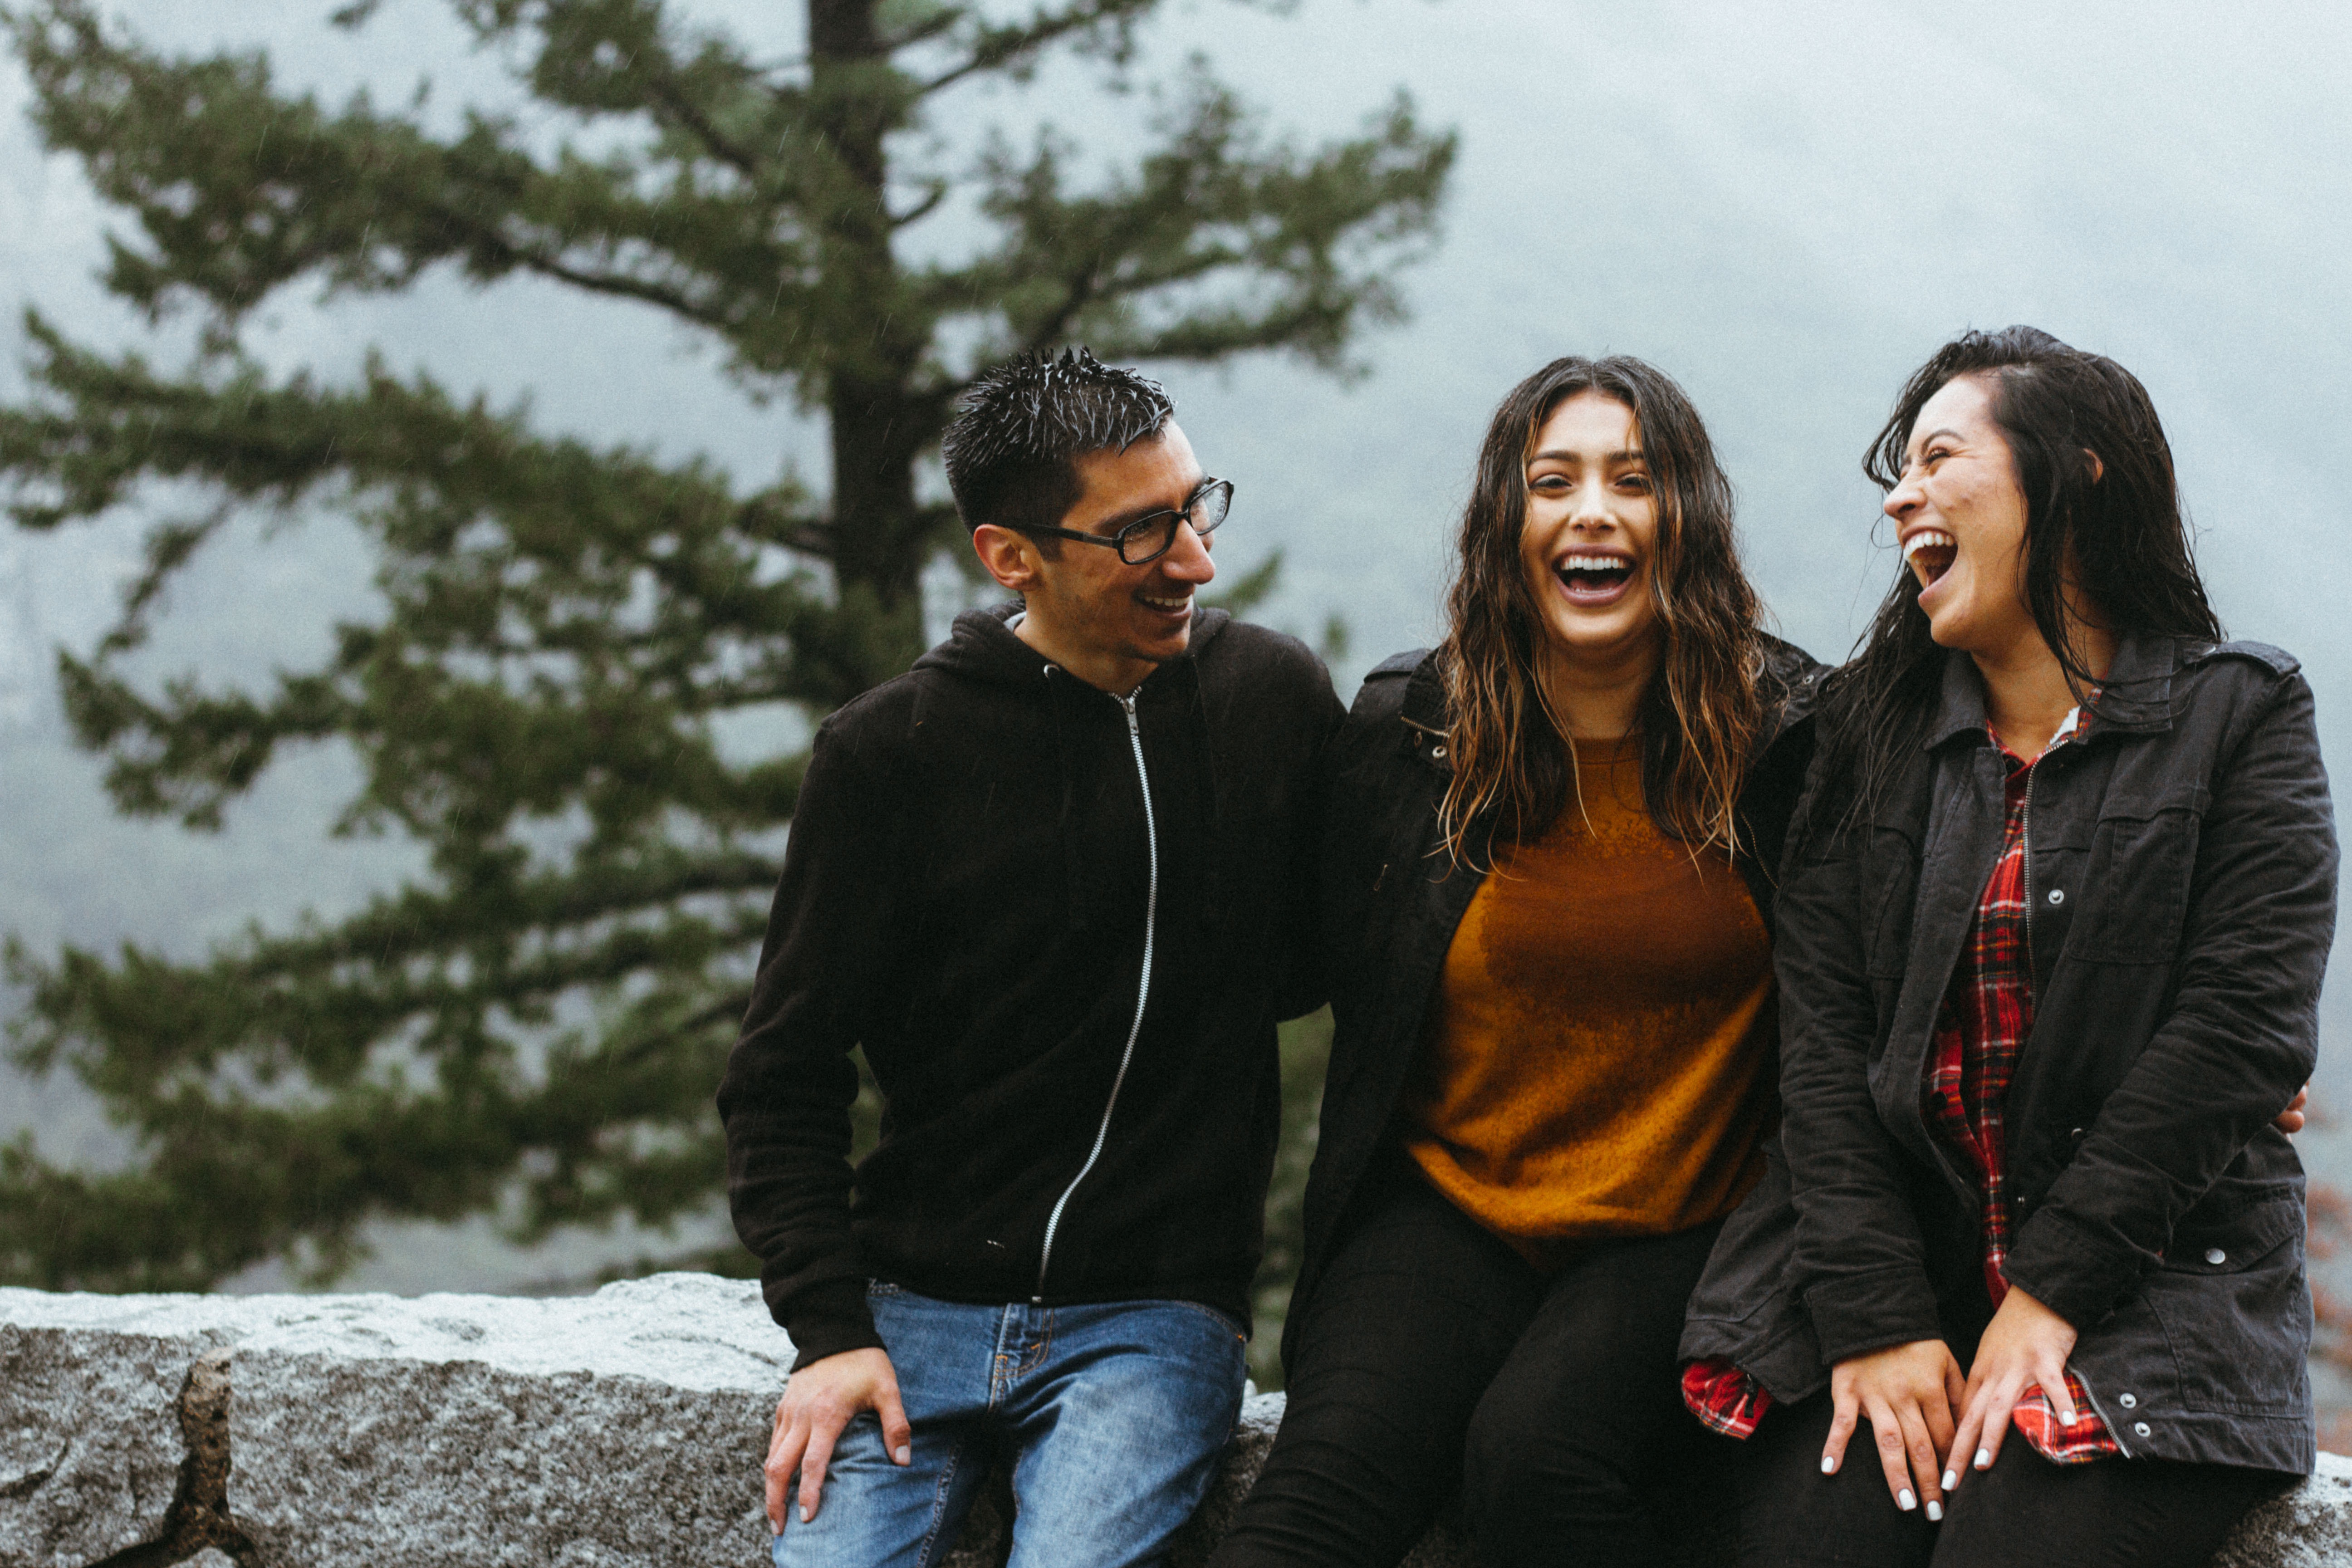 A man and two women sit on a stone wall. The three of them are laughing, enjoying one another's company.